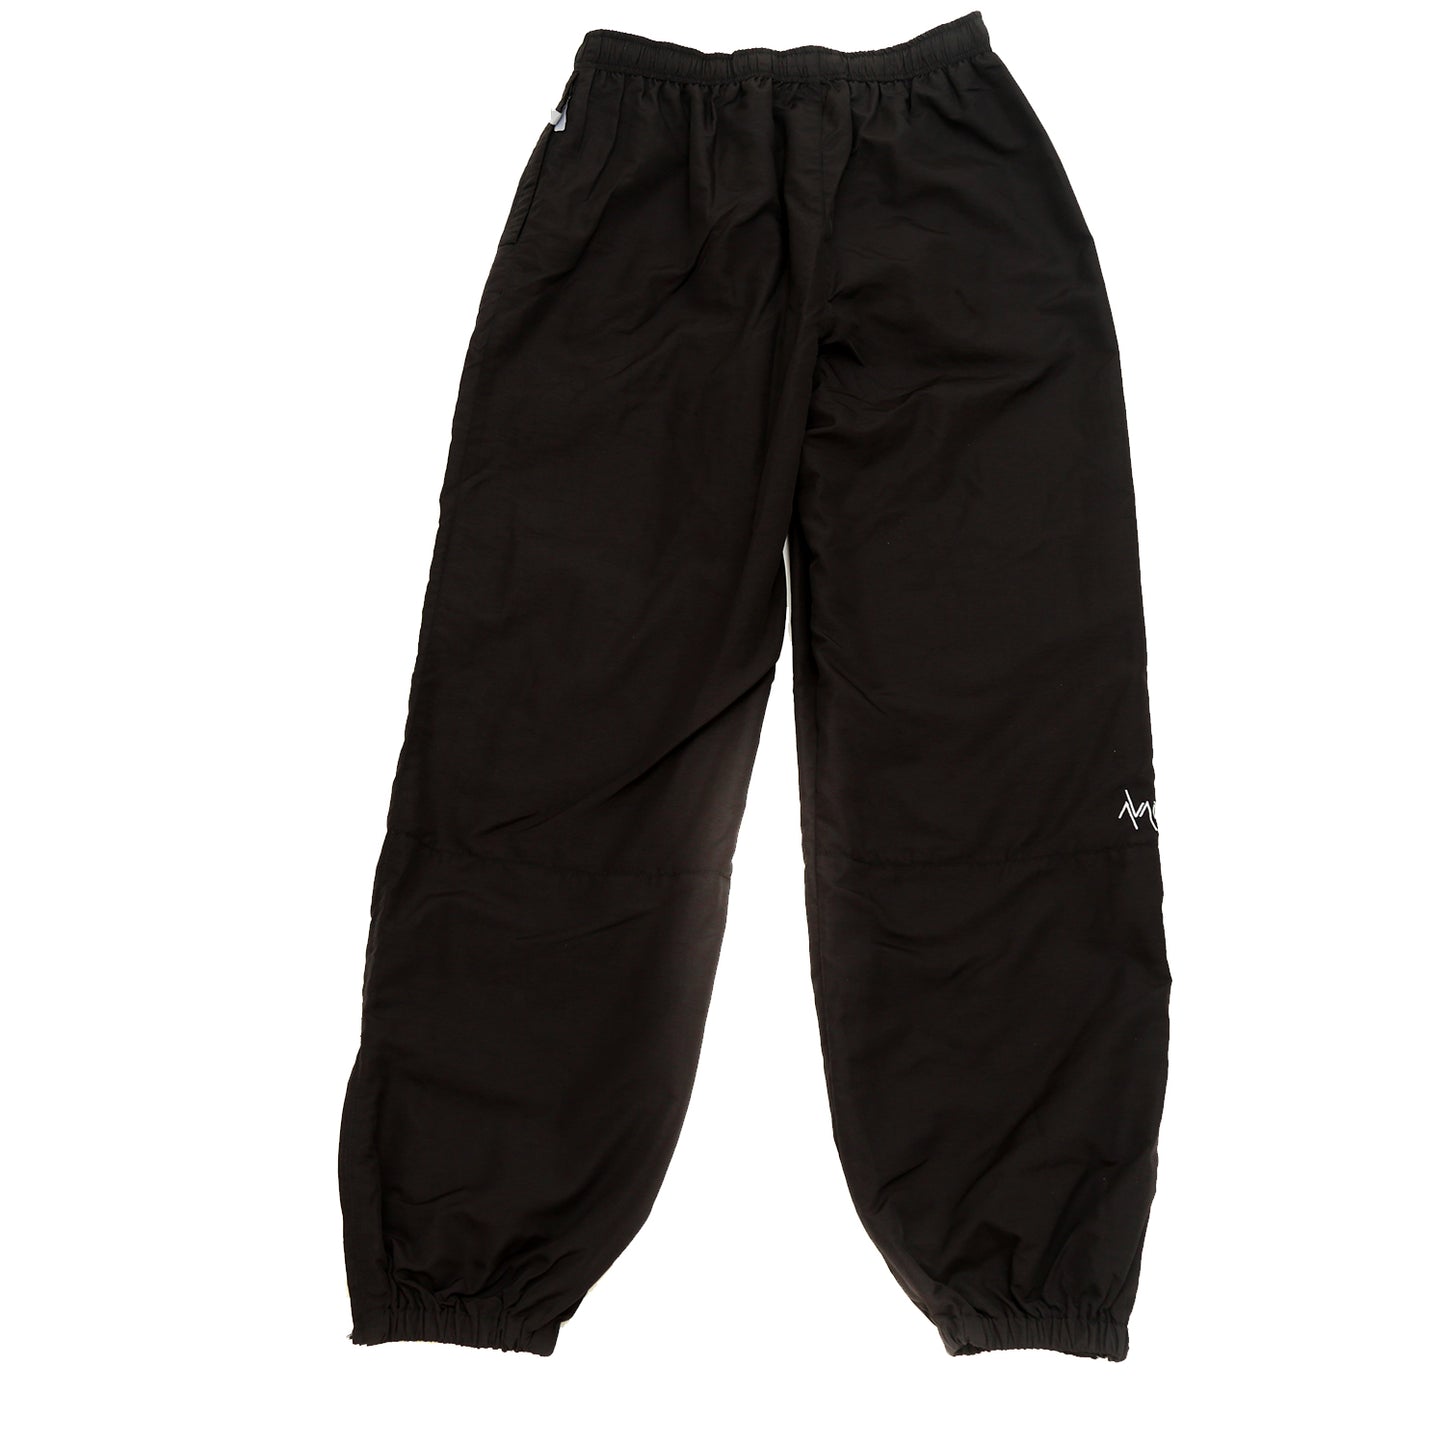 BASECAMP RUNNING WOVEN TRACK PANT IN BLACK AND WHITE